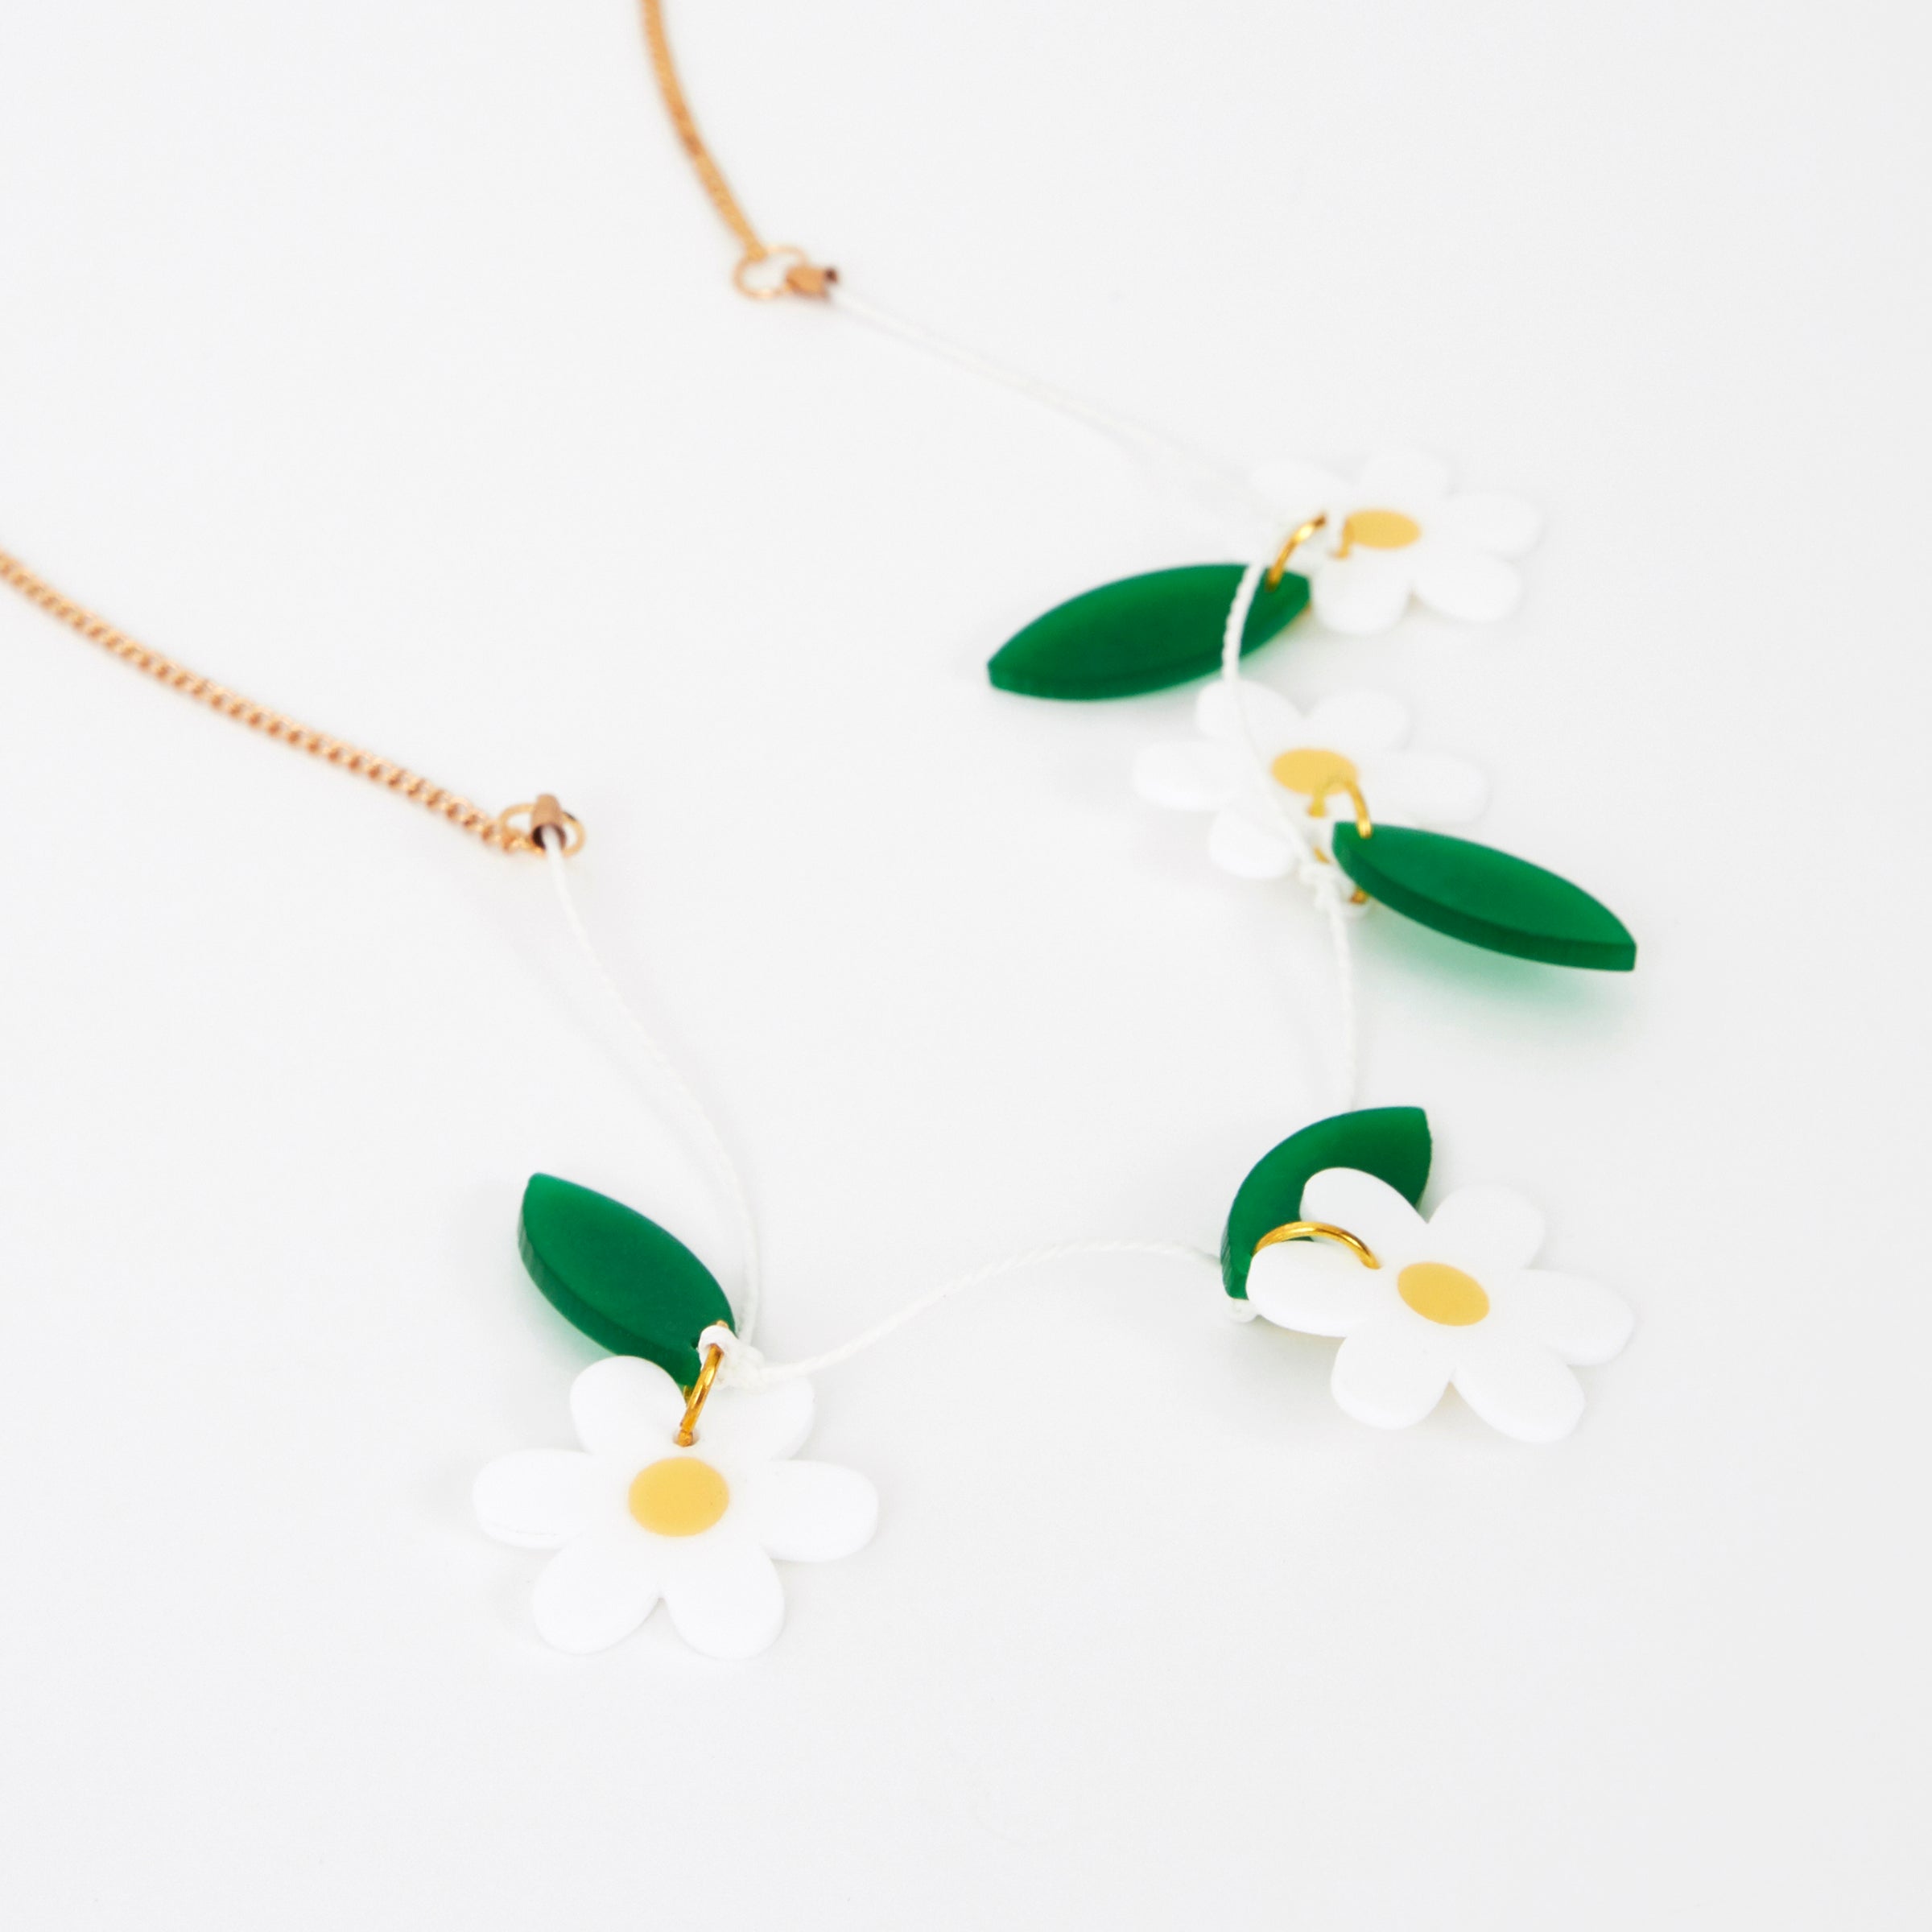 Our colourful daisy necklace is crafted from acrylic with a gold tone chain.